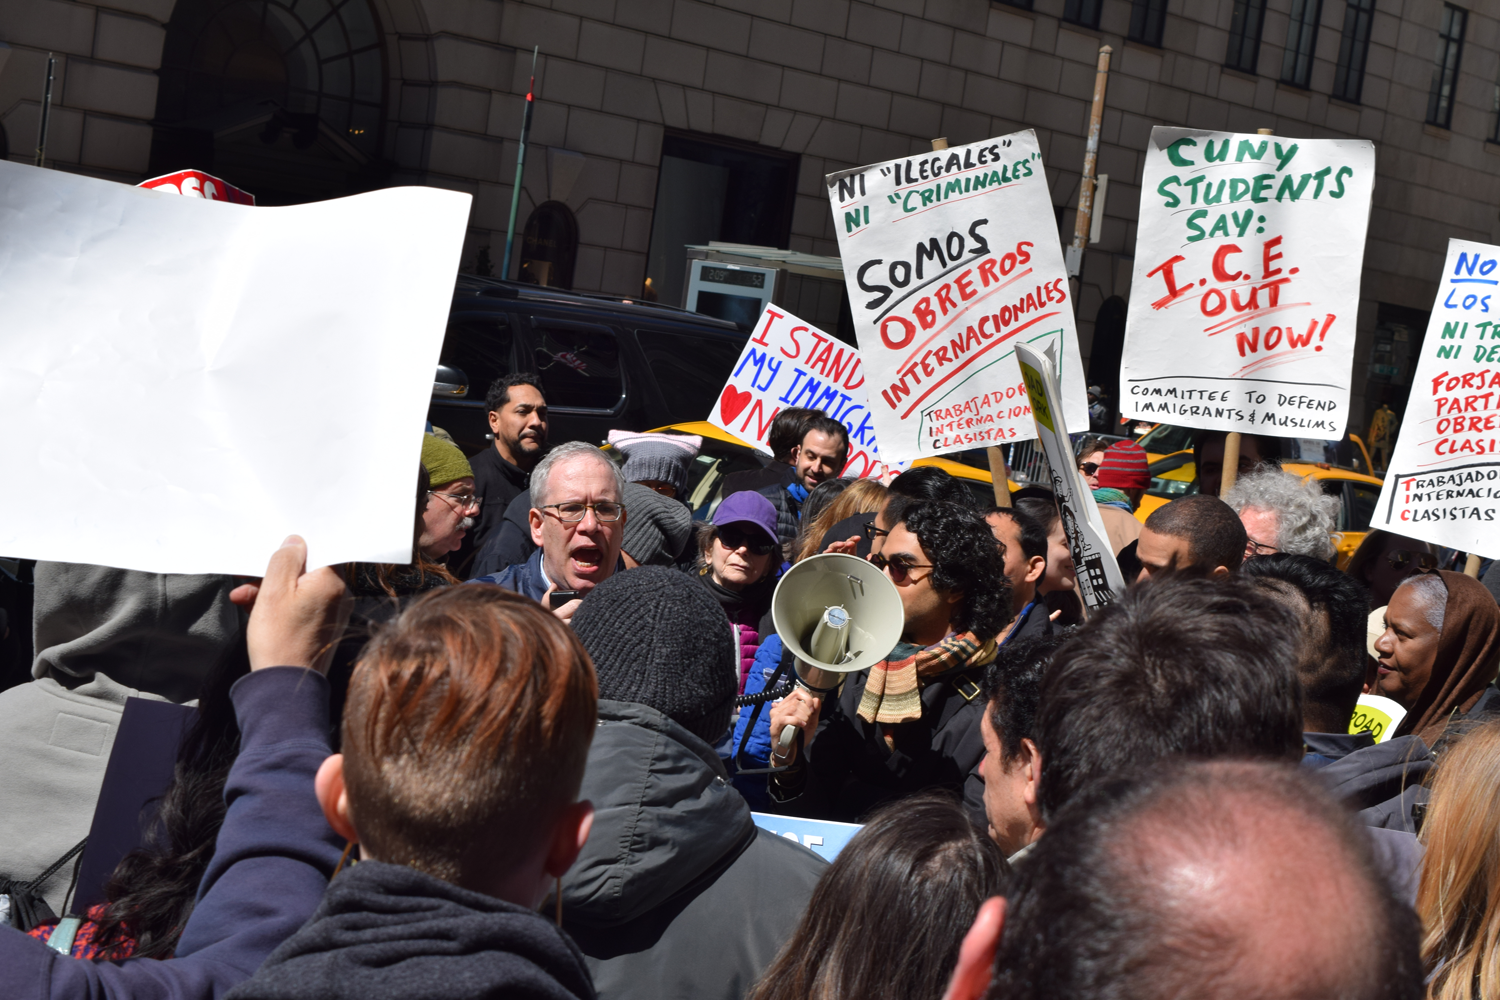 NYC Comptroller Scott Stringer expresses his support with protesters in front of Trump Tower.